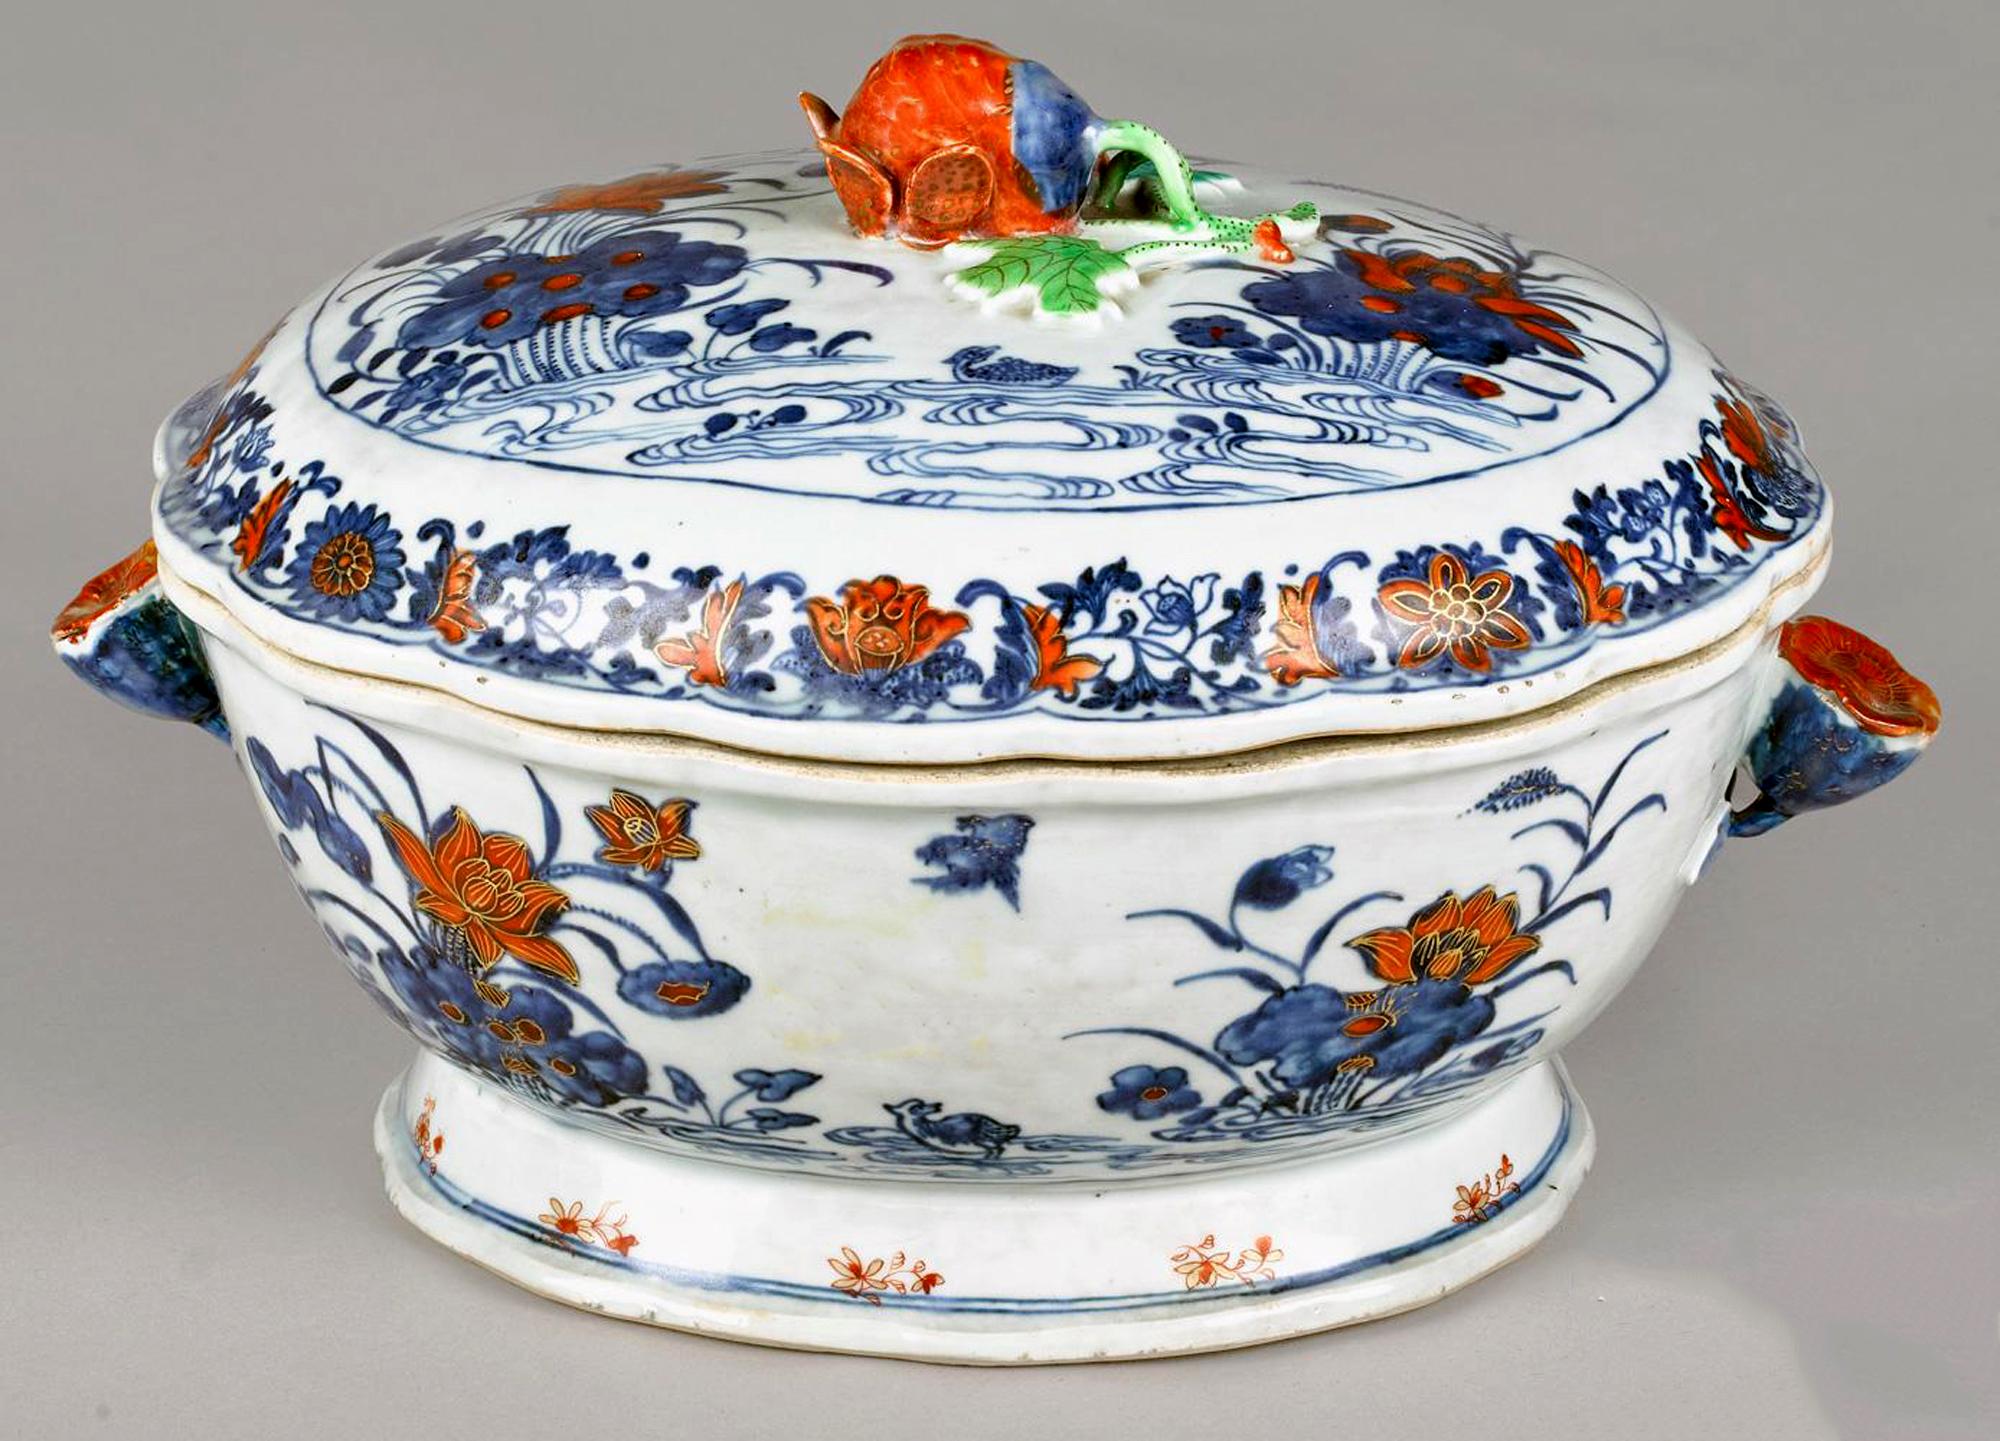 Chinese export porcelain Imari Tureen and cover,
Circa 1780

The Chinese Export porcelain tureen and cover are painted in the Imari palette. The body and cover are painted in underglaze blue and iron-red with ducks on a pond surrounded by water